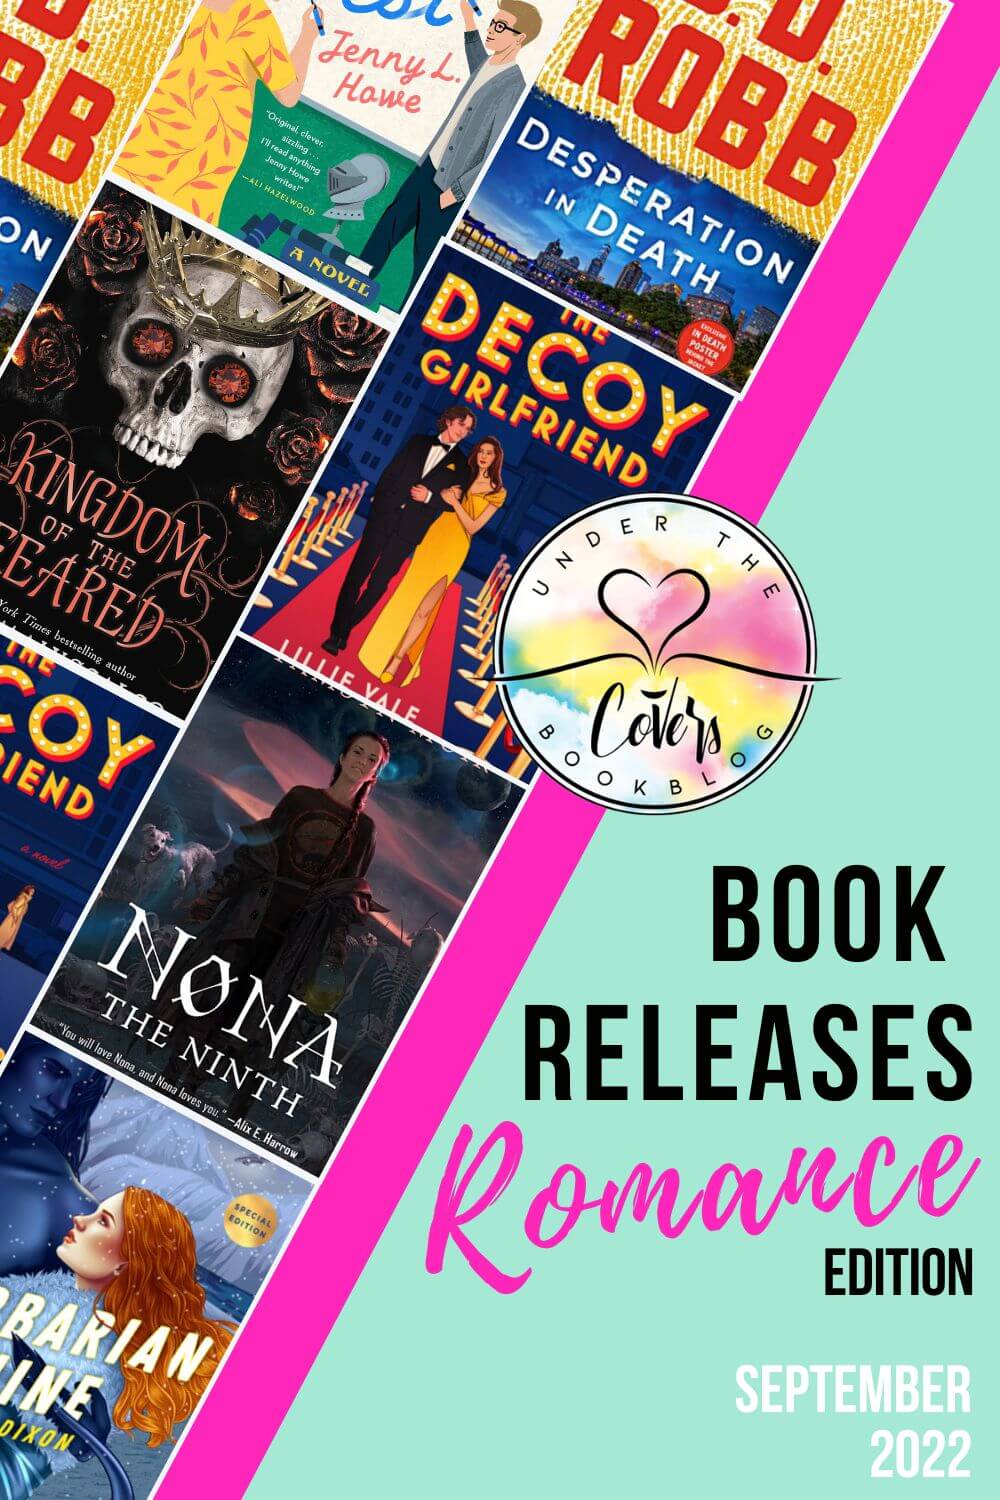 Romance book releases for September 2022 you can’t miss!